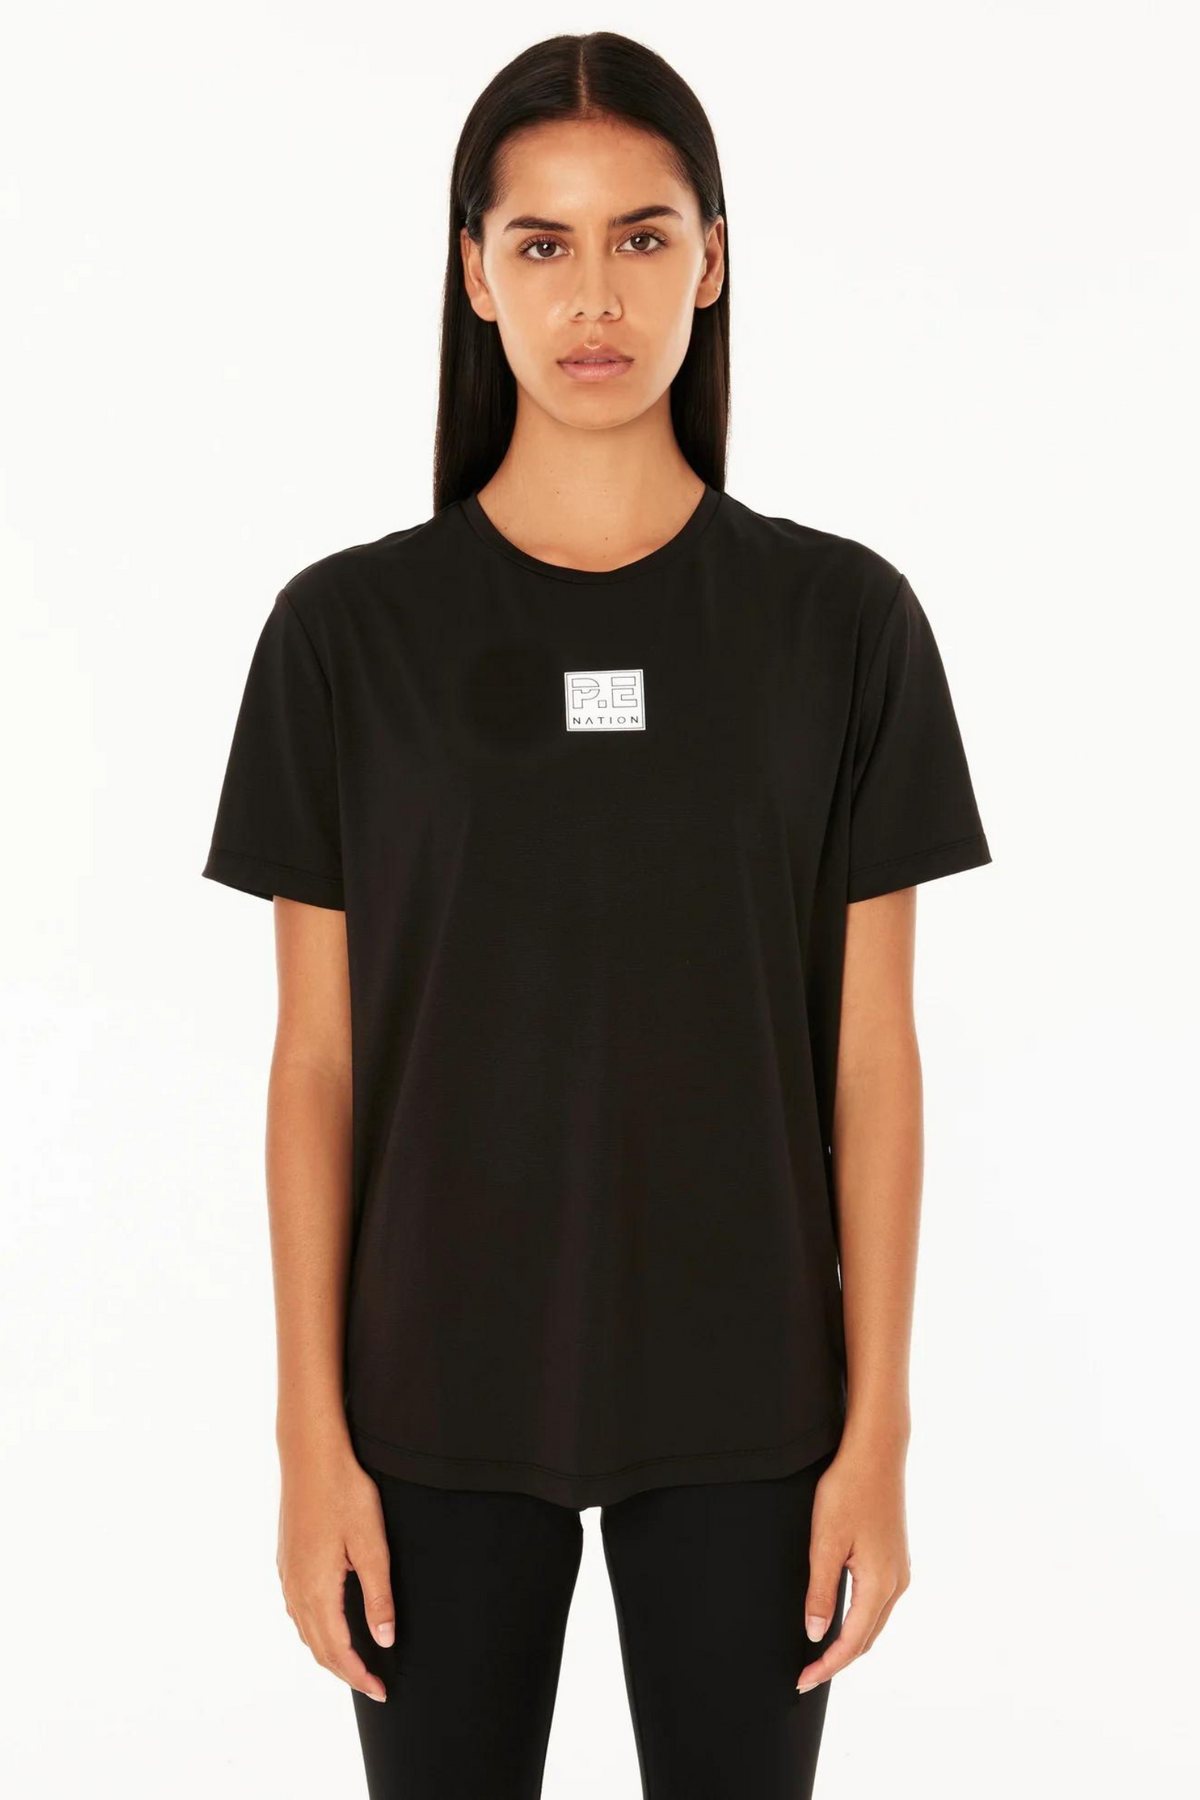 CROSSOVER AIR FORM TEE IN BLACK